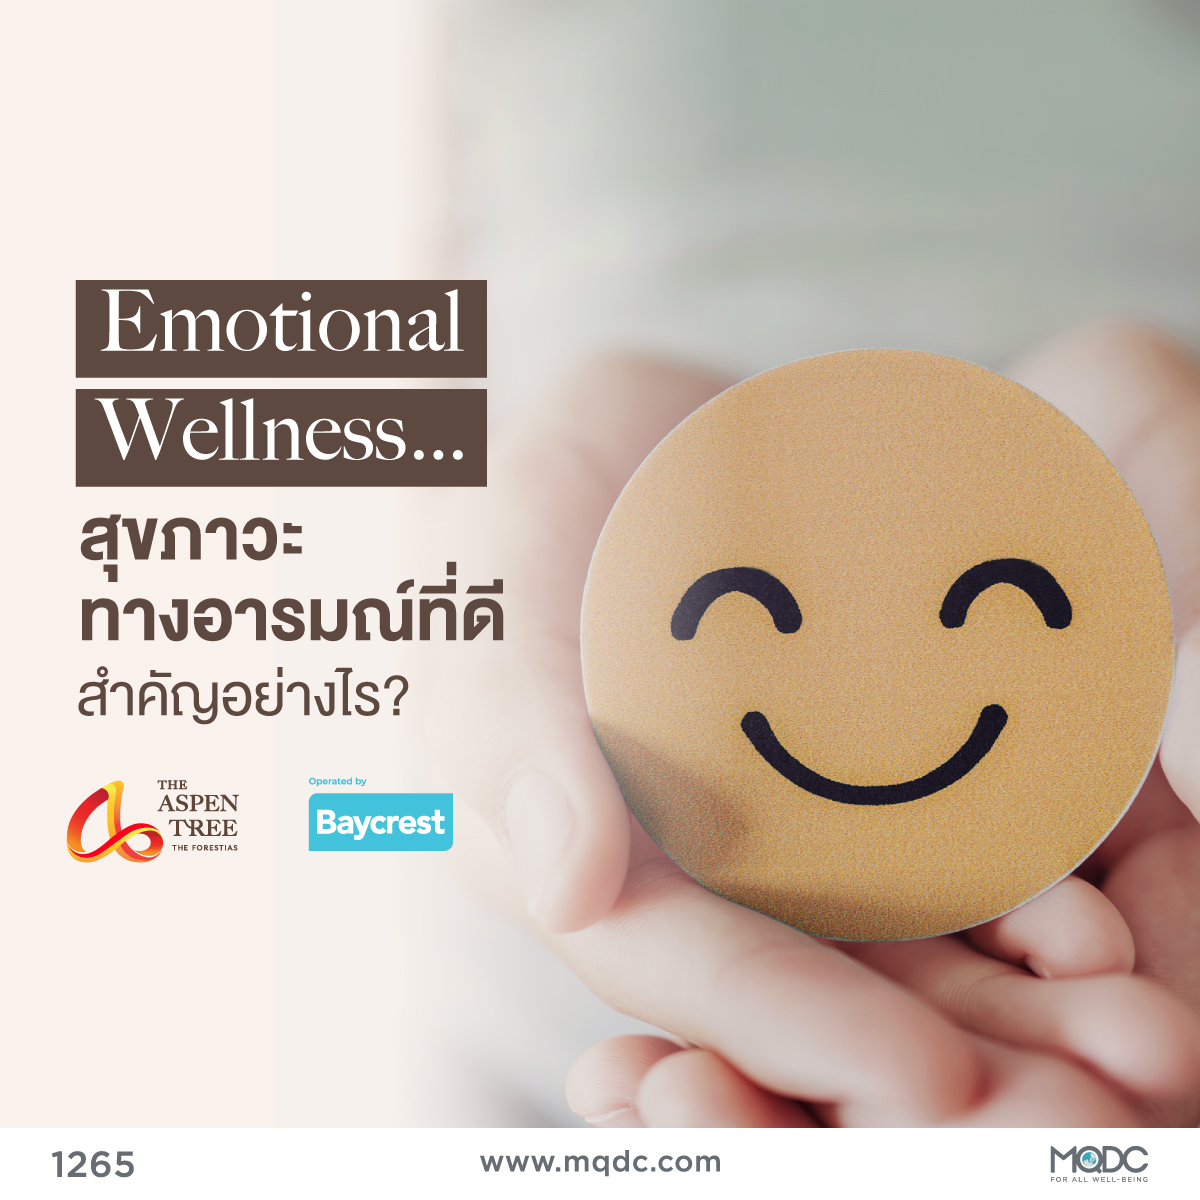 Emotional Well-Being... How Much Does It Matter?